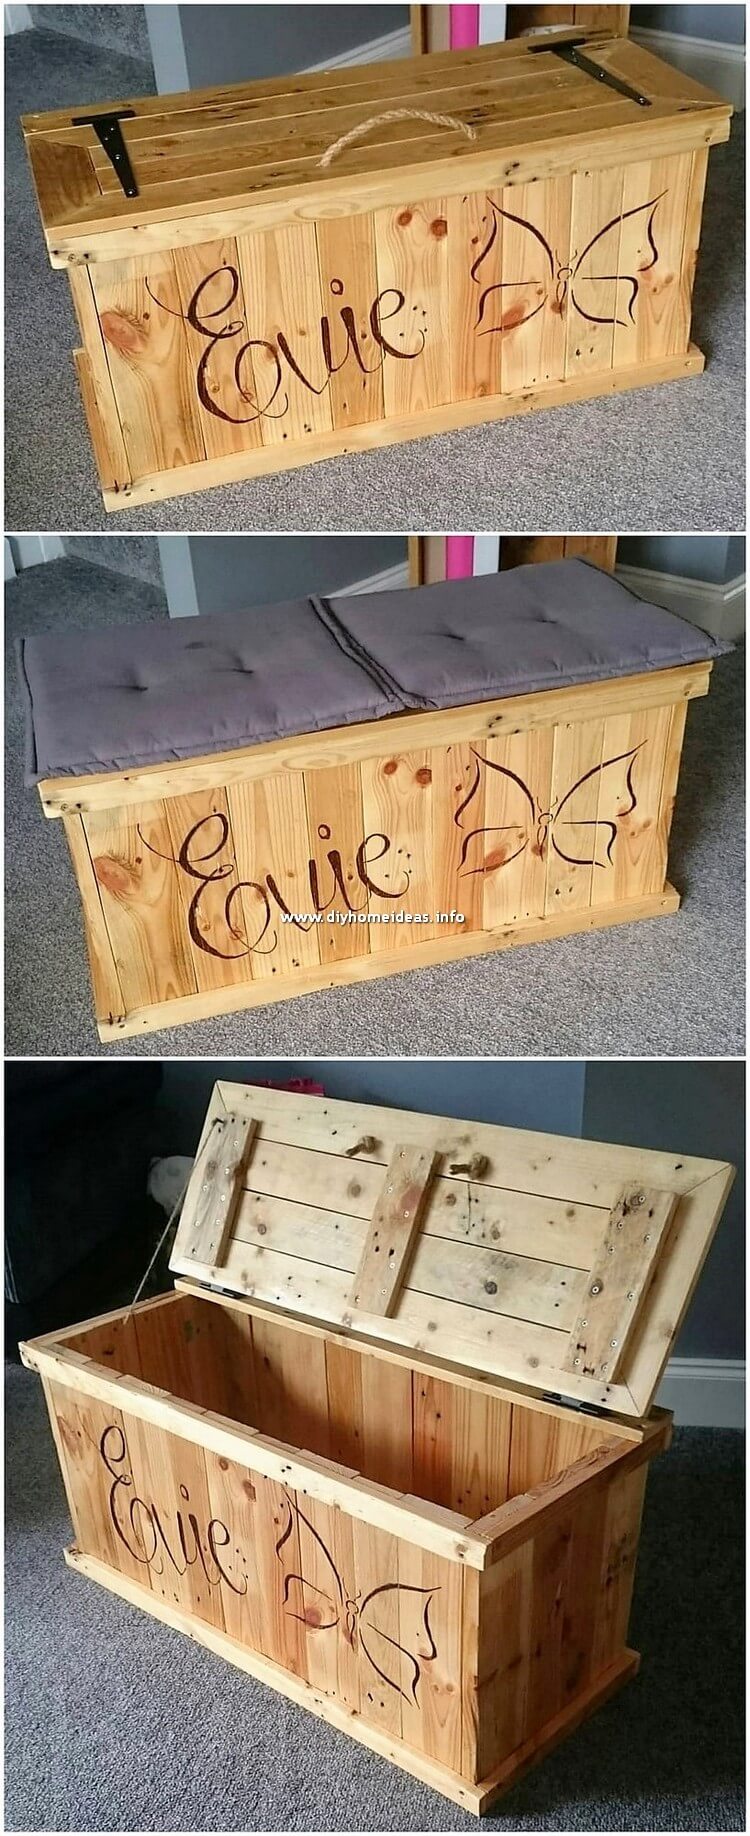 Wood Pallet Seat with Storage